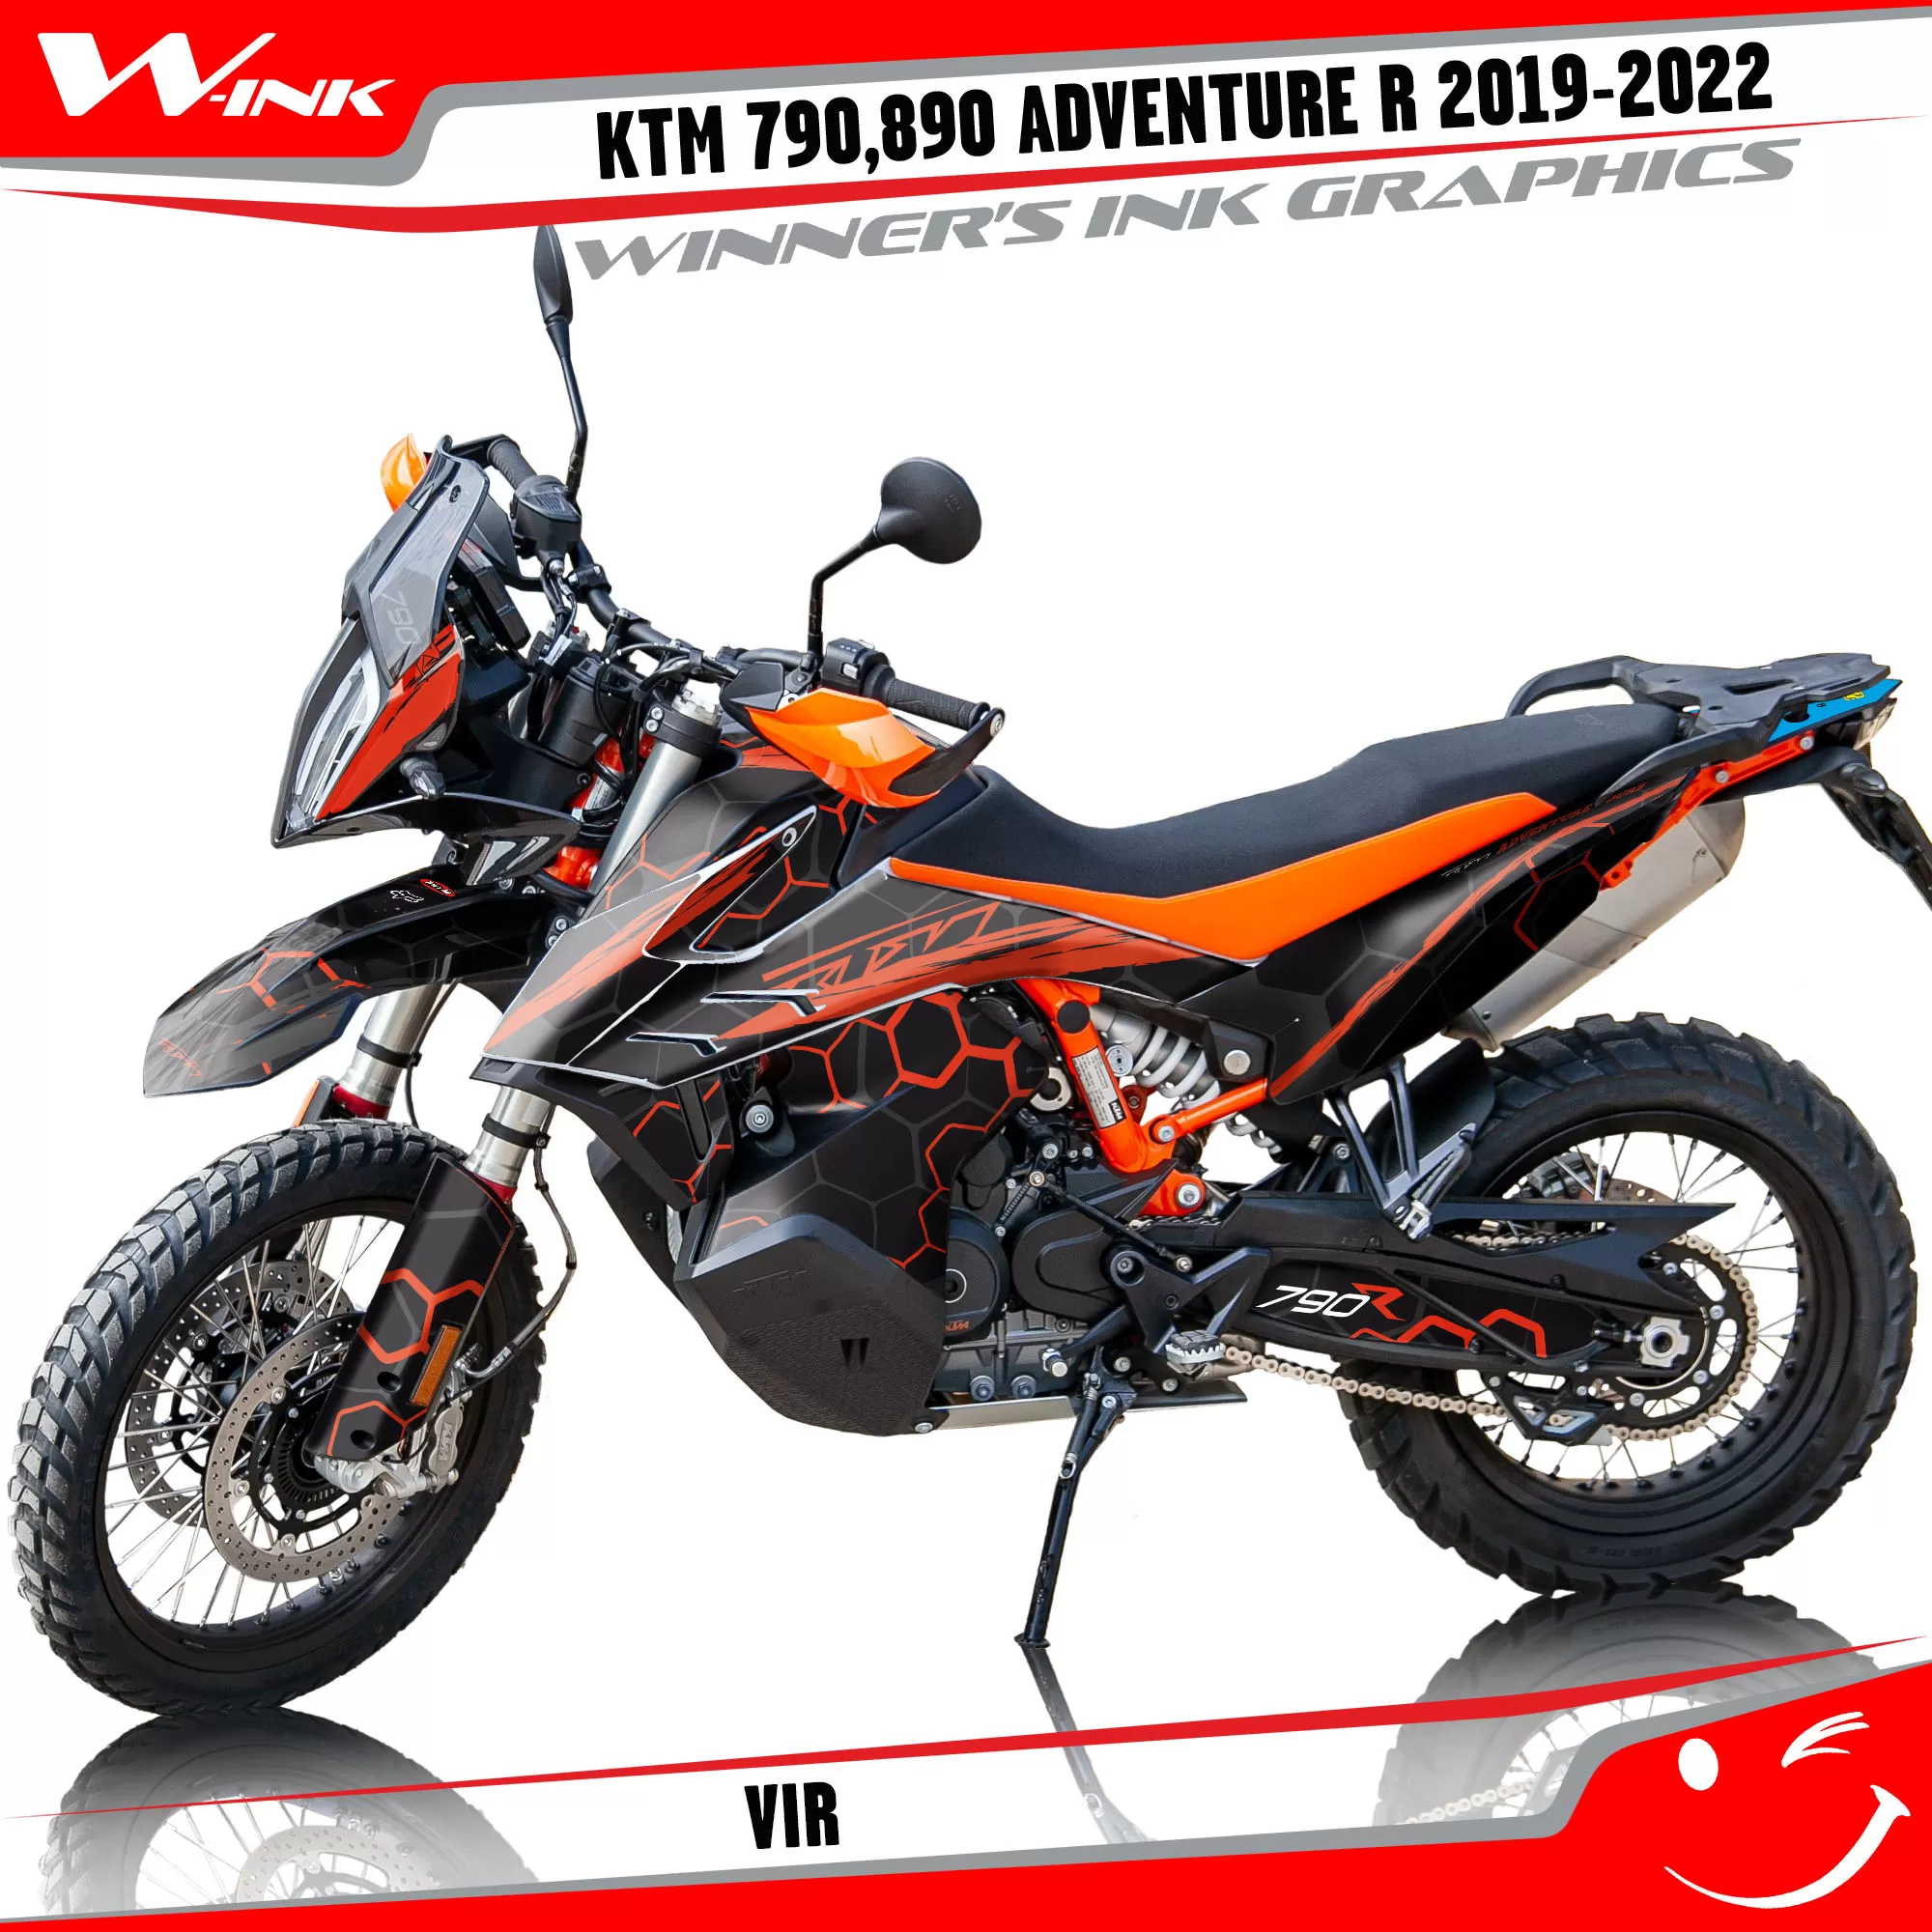 Adventure-R-790-890-2019-2020-2021-2022-graphics-kit-and-decals-with-designs-Vir